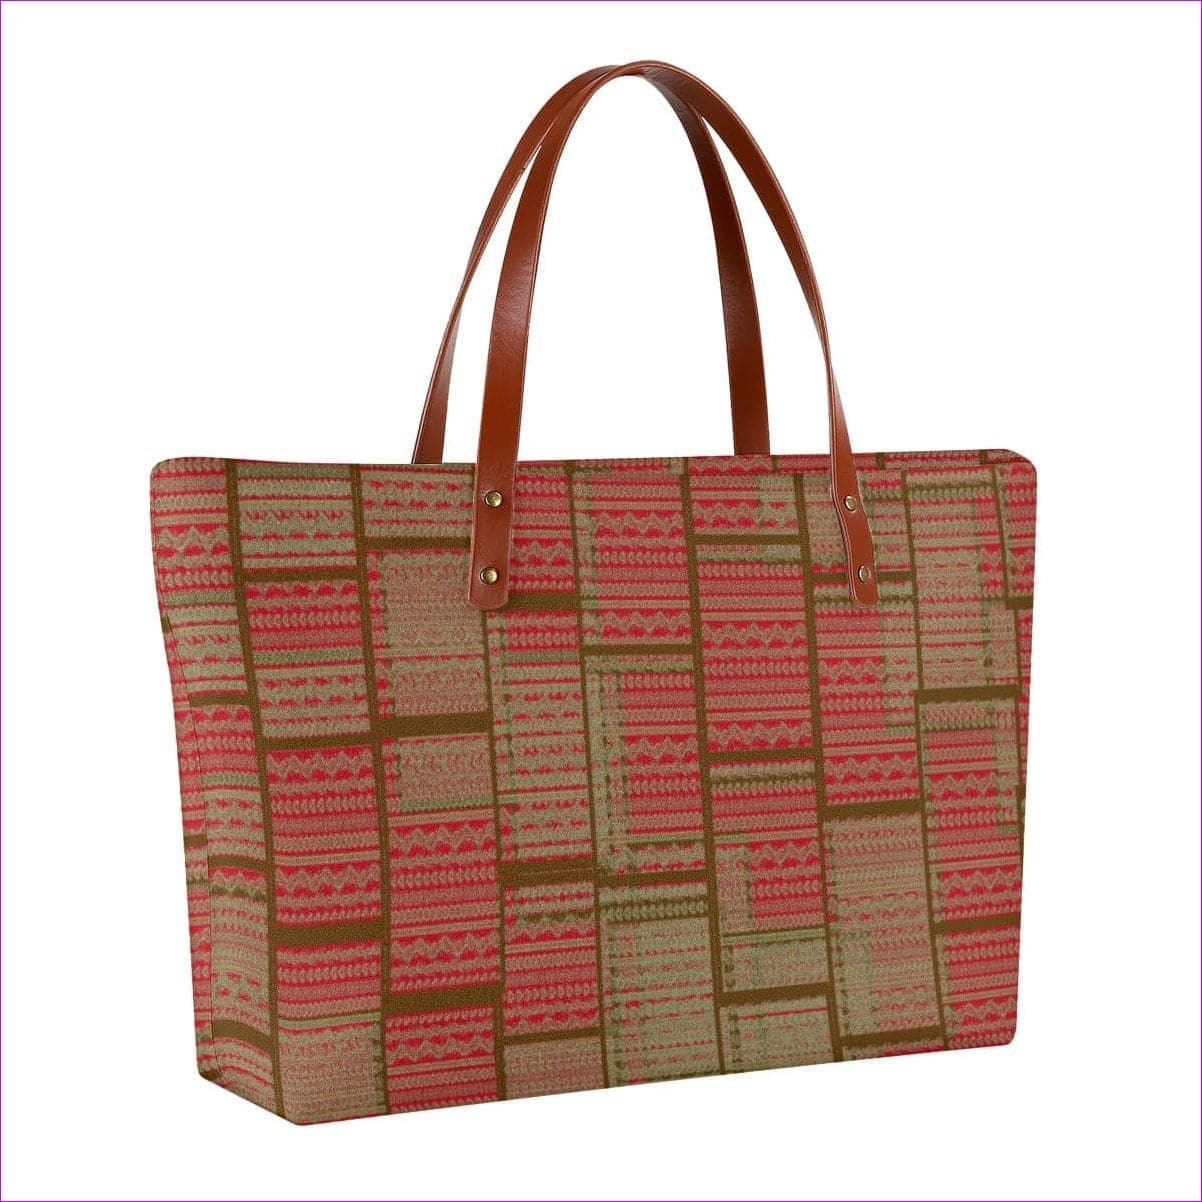 Chained 2 Womens Tote Bag - Tote bags at TFC&H Co.